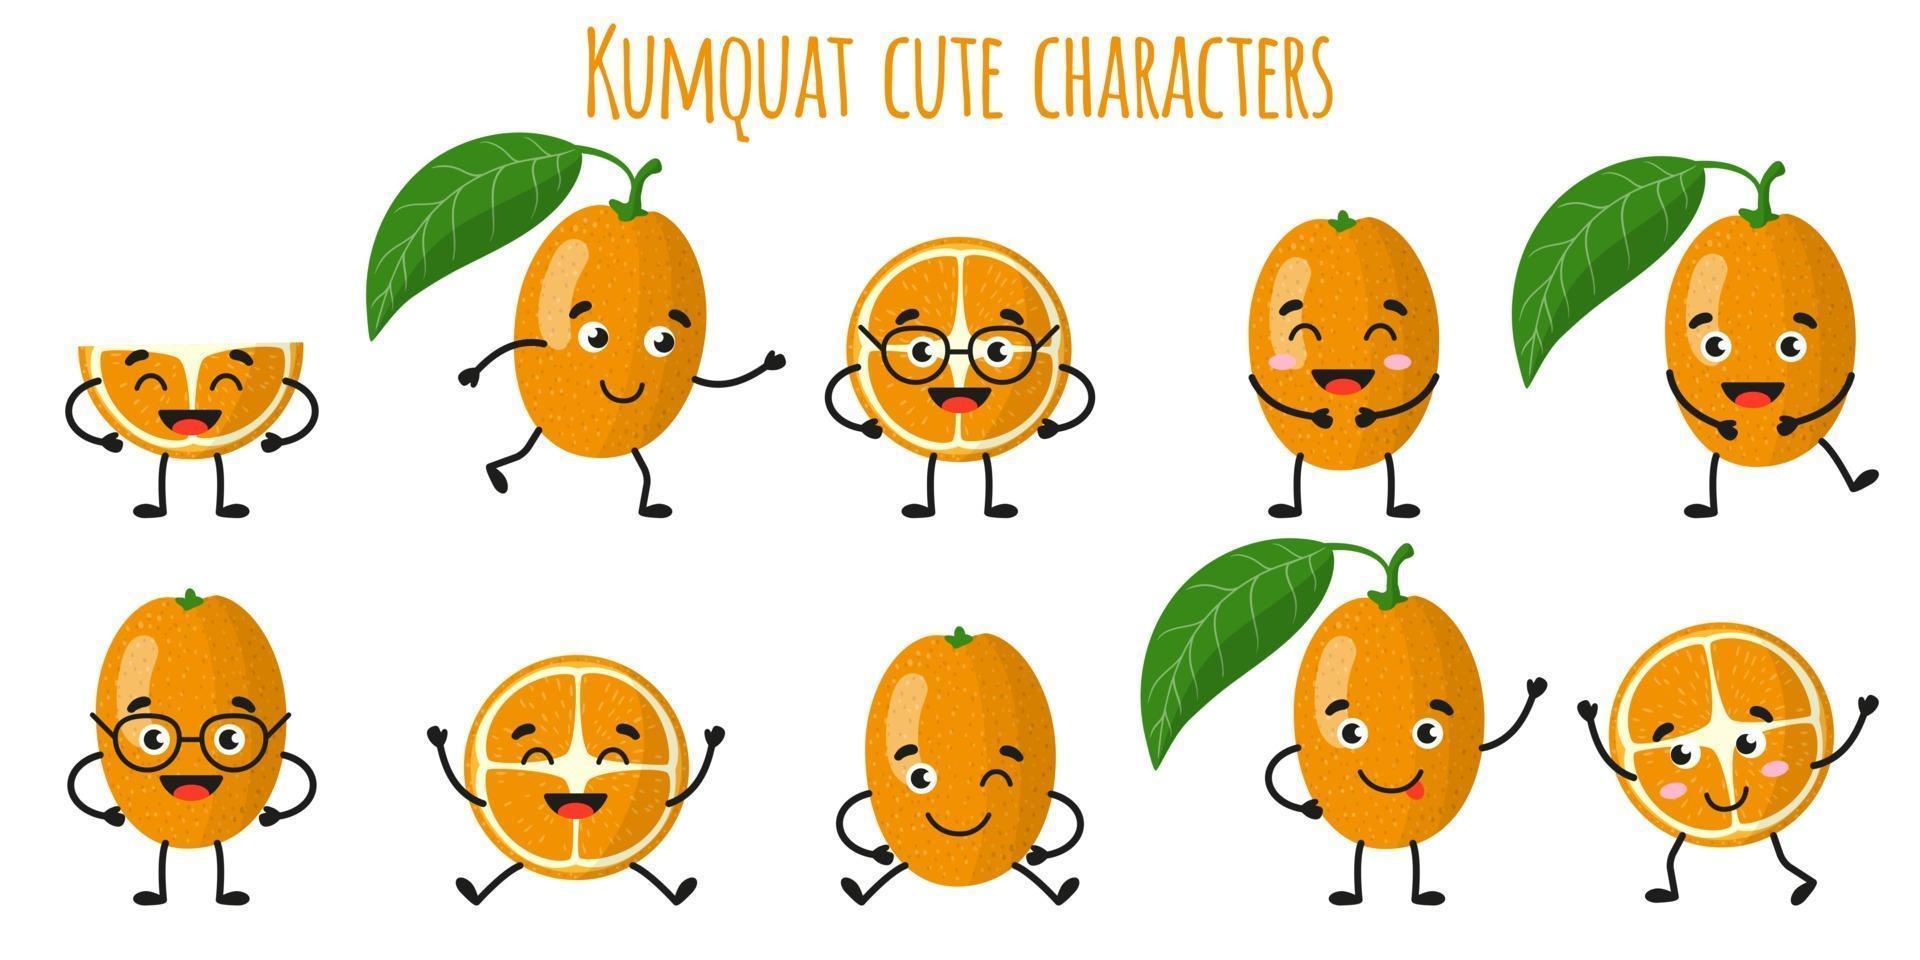 Kumquat citrus fruit cute funny cheerful characters with different poses and emotions. vector